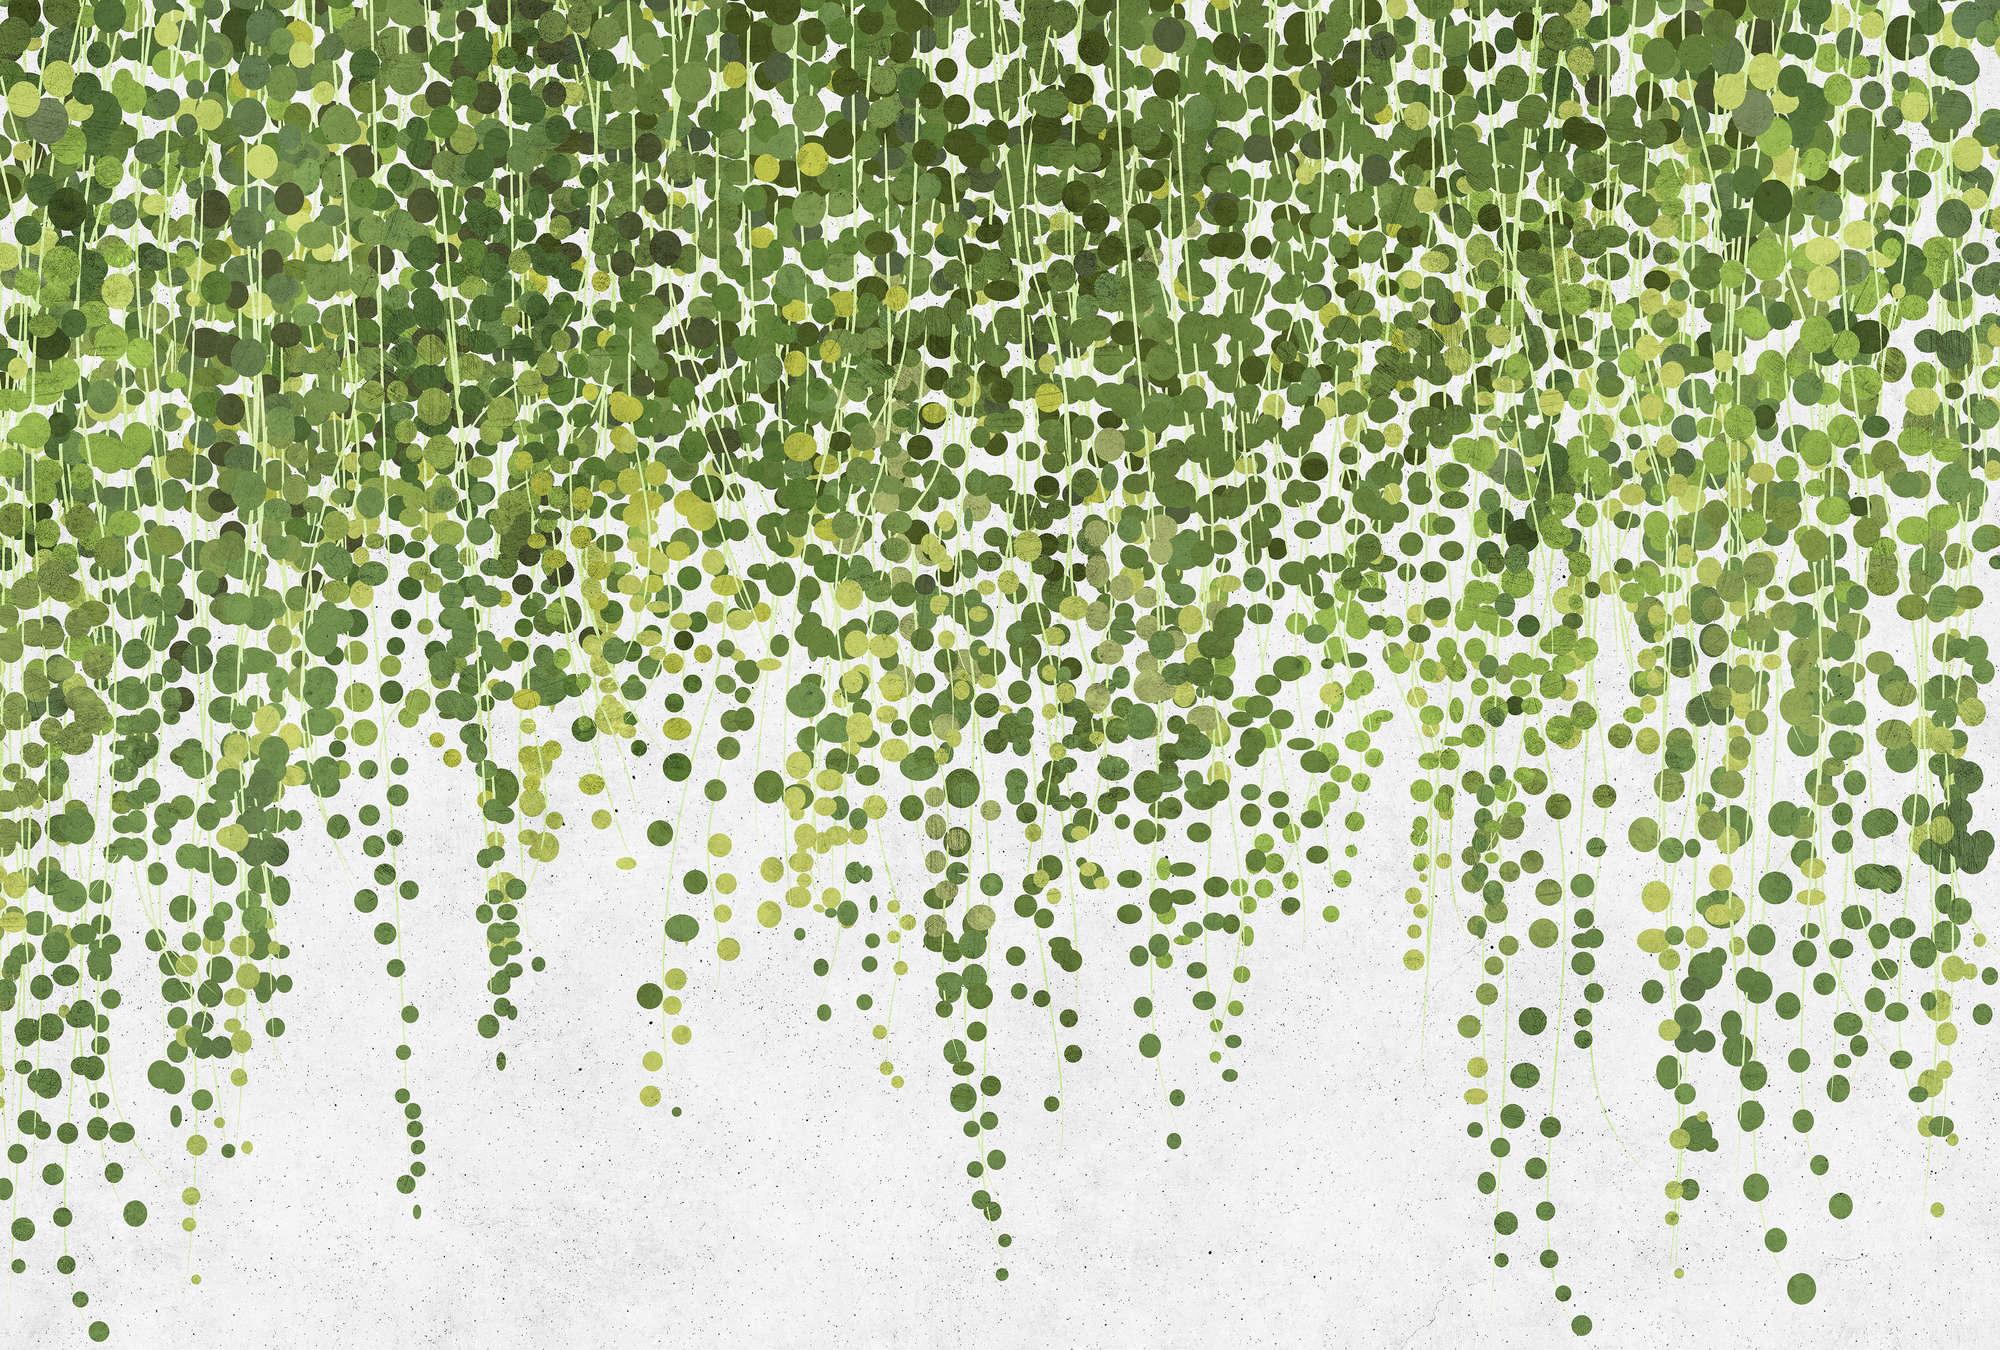             Hanging Garden 1 - Wallpaper Leaves and Tendrils, Hanging Garden in Concrete Structure - Grey, Green | Matt Smooth Non-woven
        